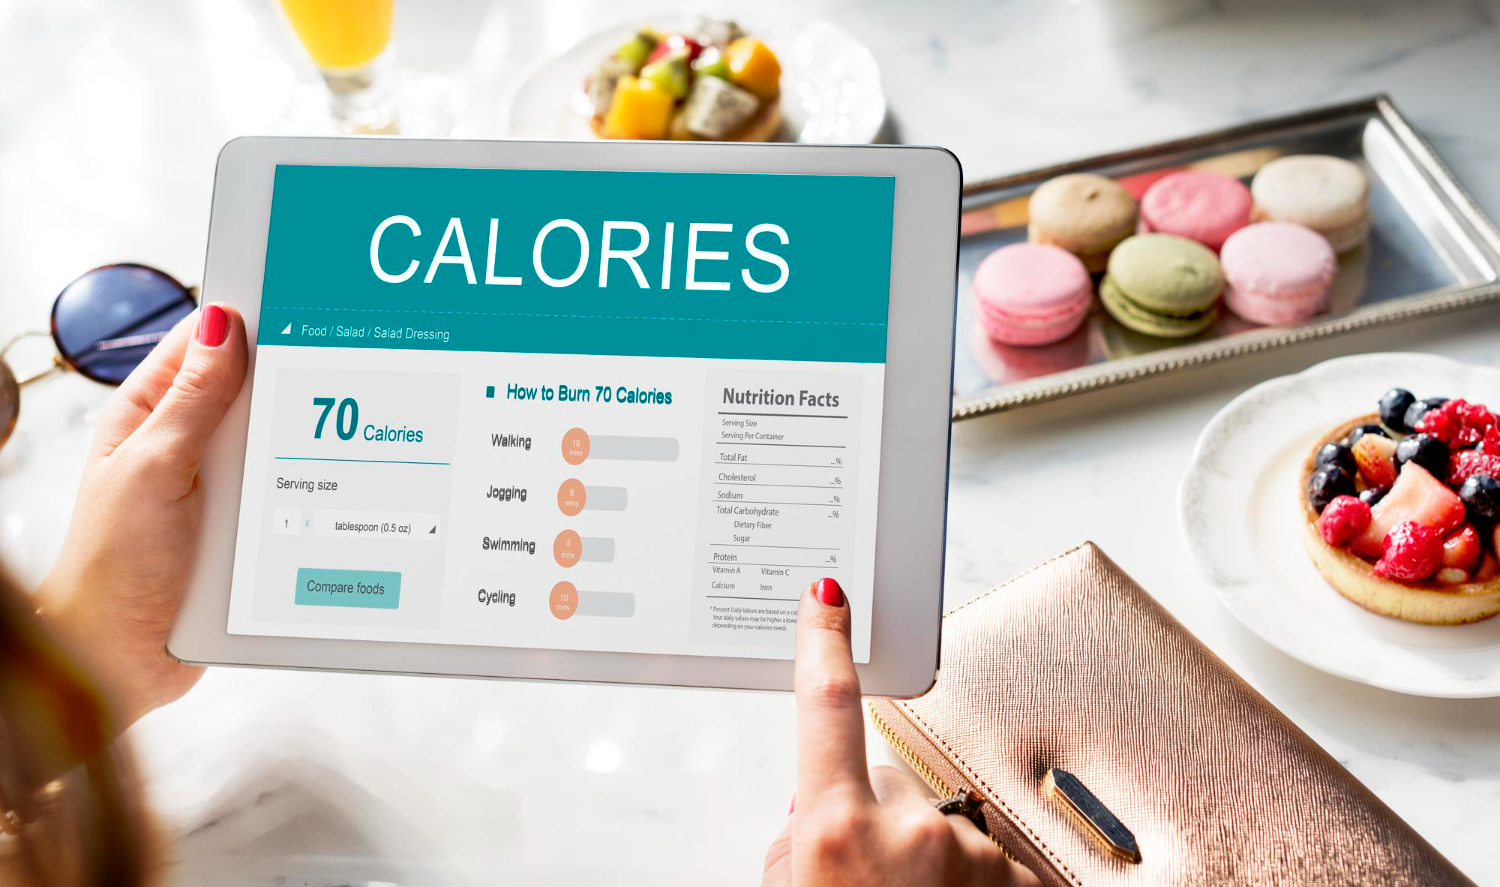 Understand how to reduce calories for weight loss graphically and create a calorie deficit. If you cut too many calories from the diet suddenly, your progress will decline and plateau.